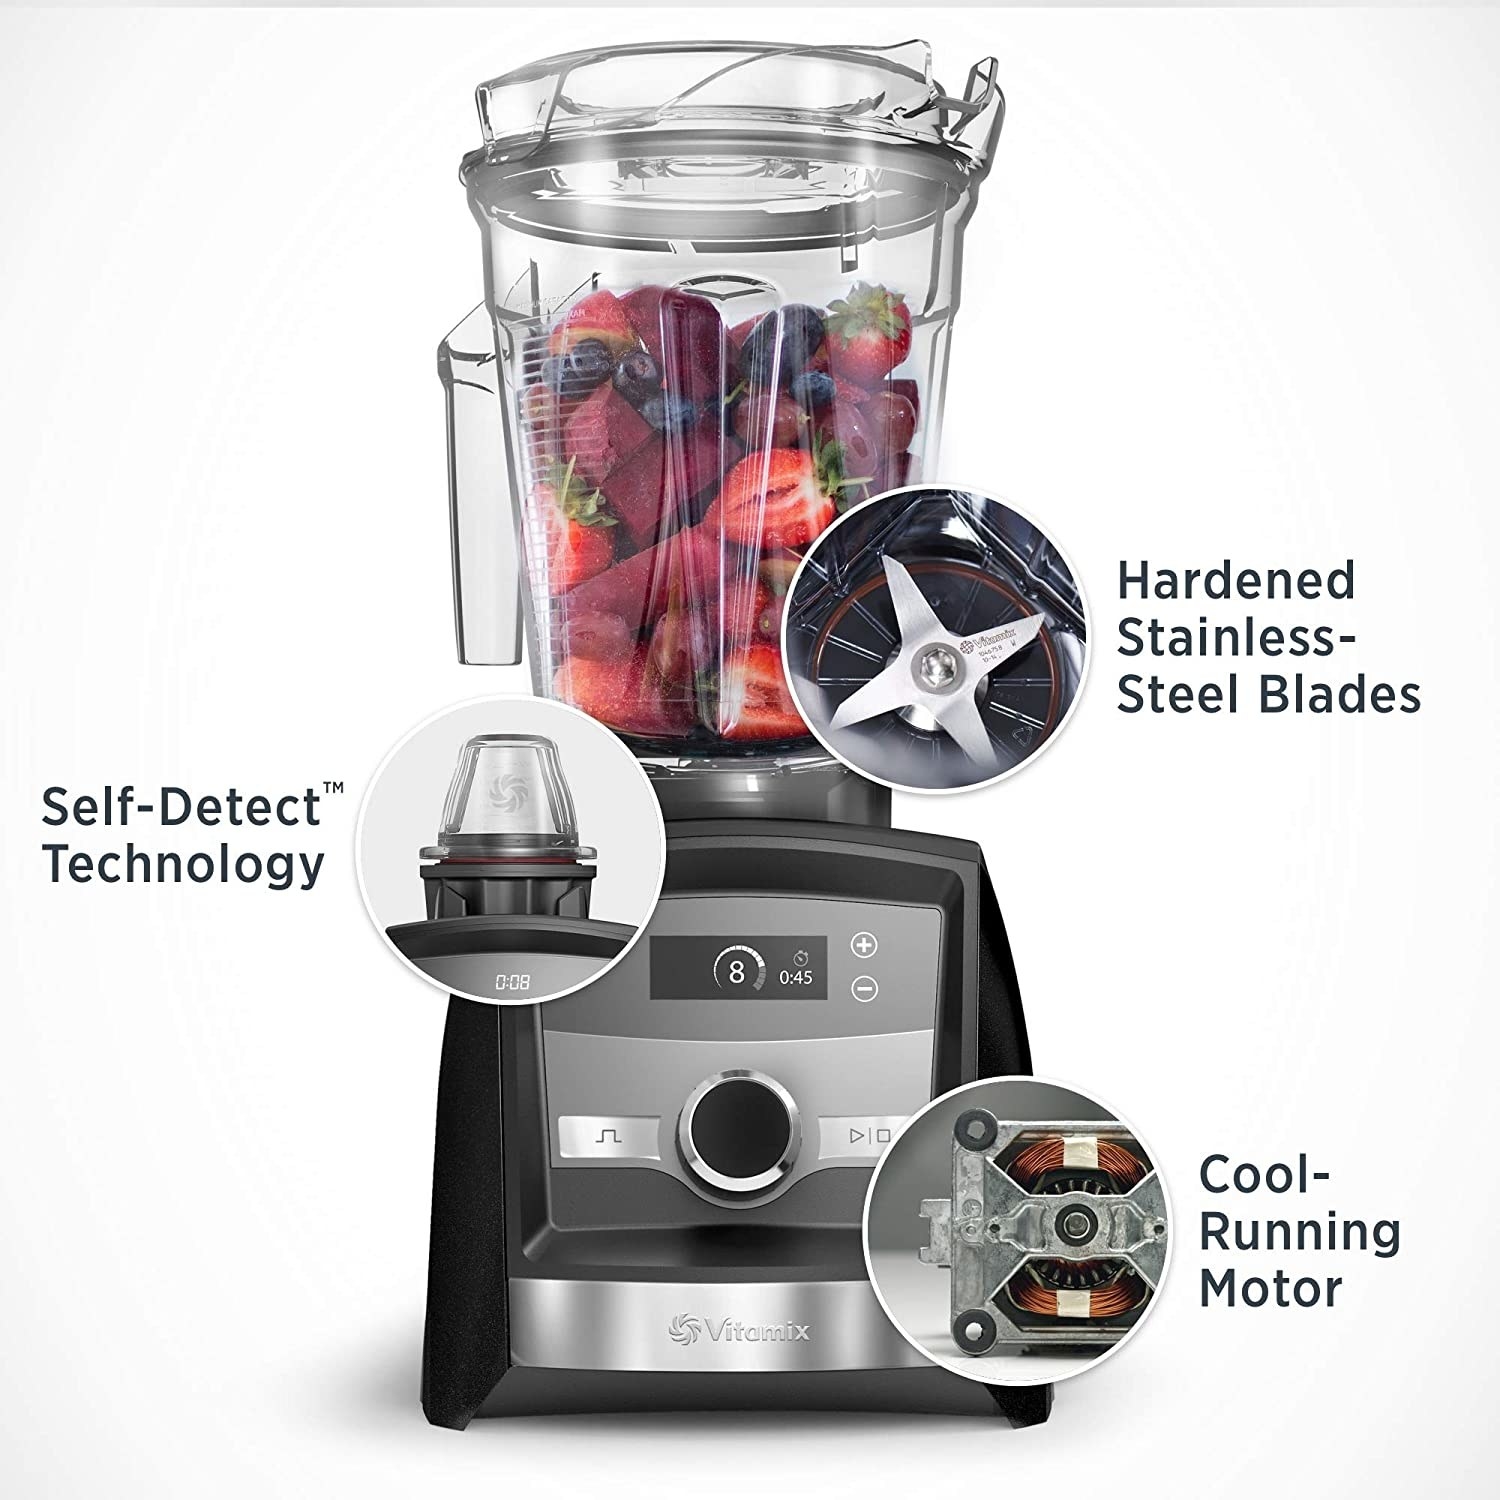 The Vitamix with zoom-ins on its motor, self-detect technology, and steel blades